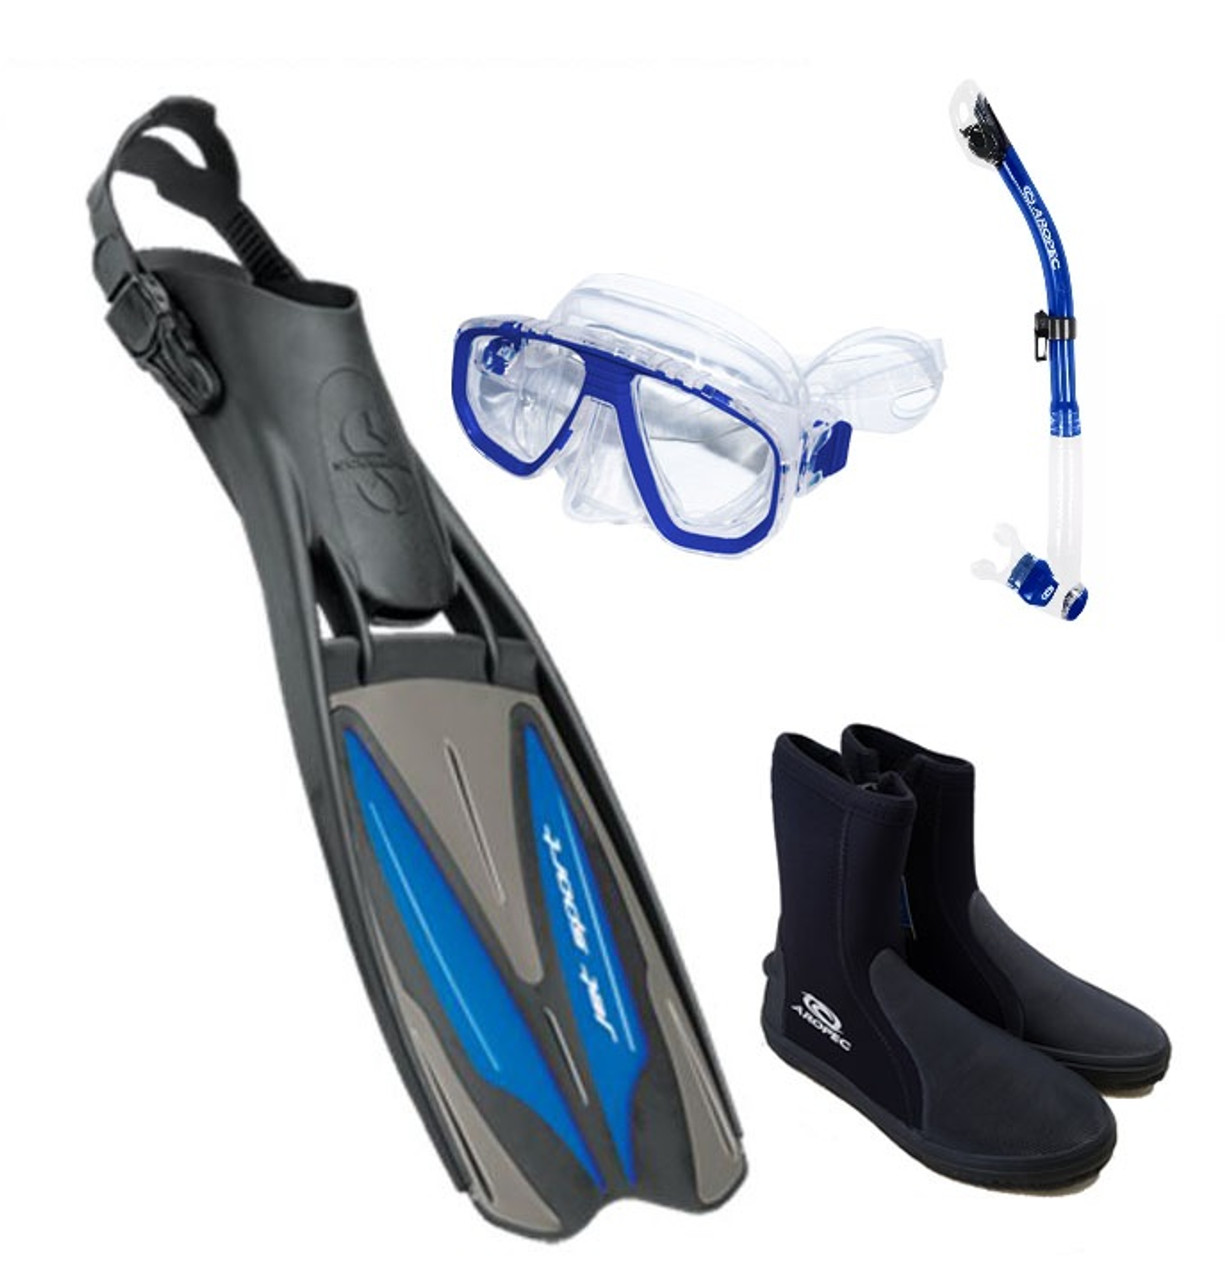 Accessories for scuba diving, fishing and more, we have them all!